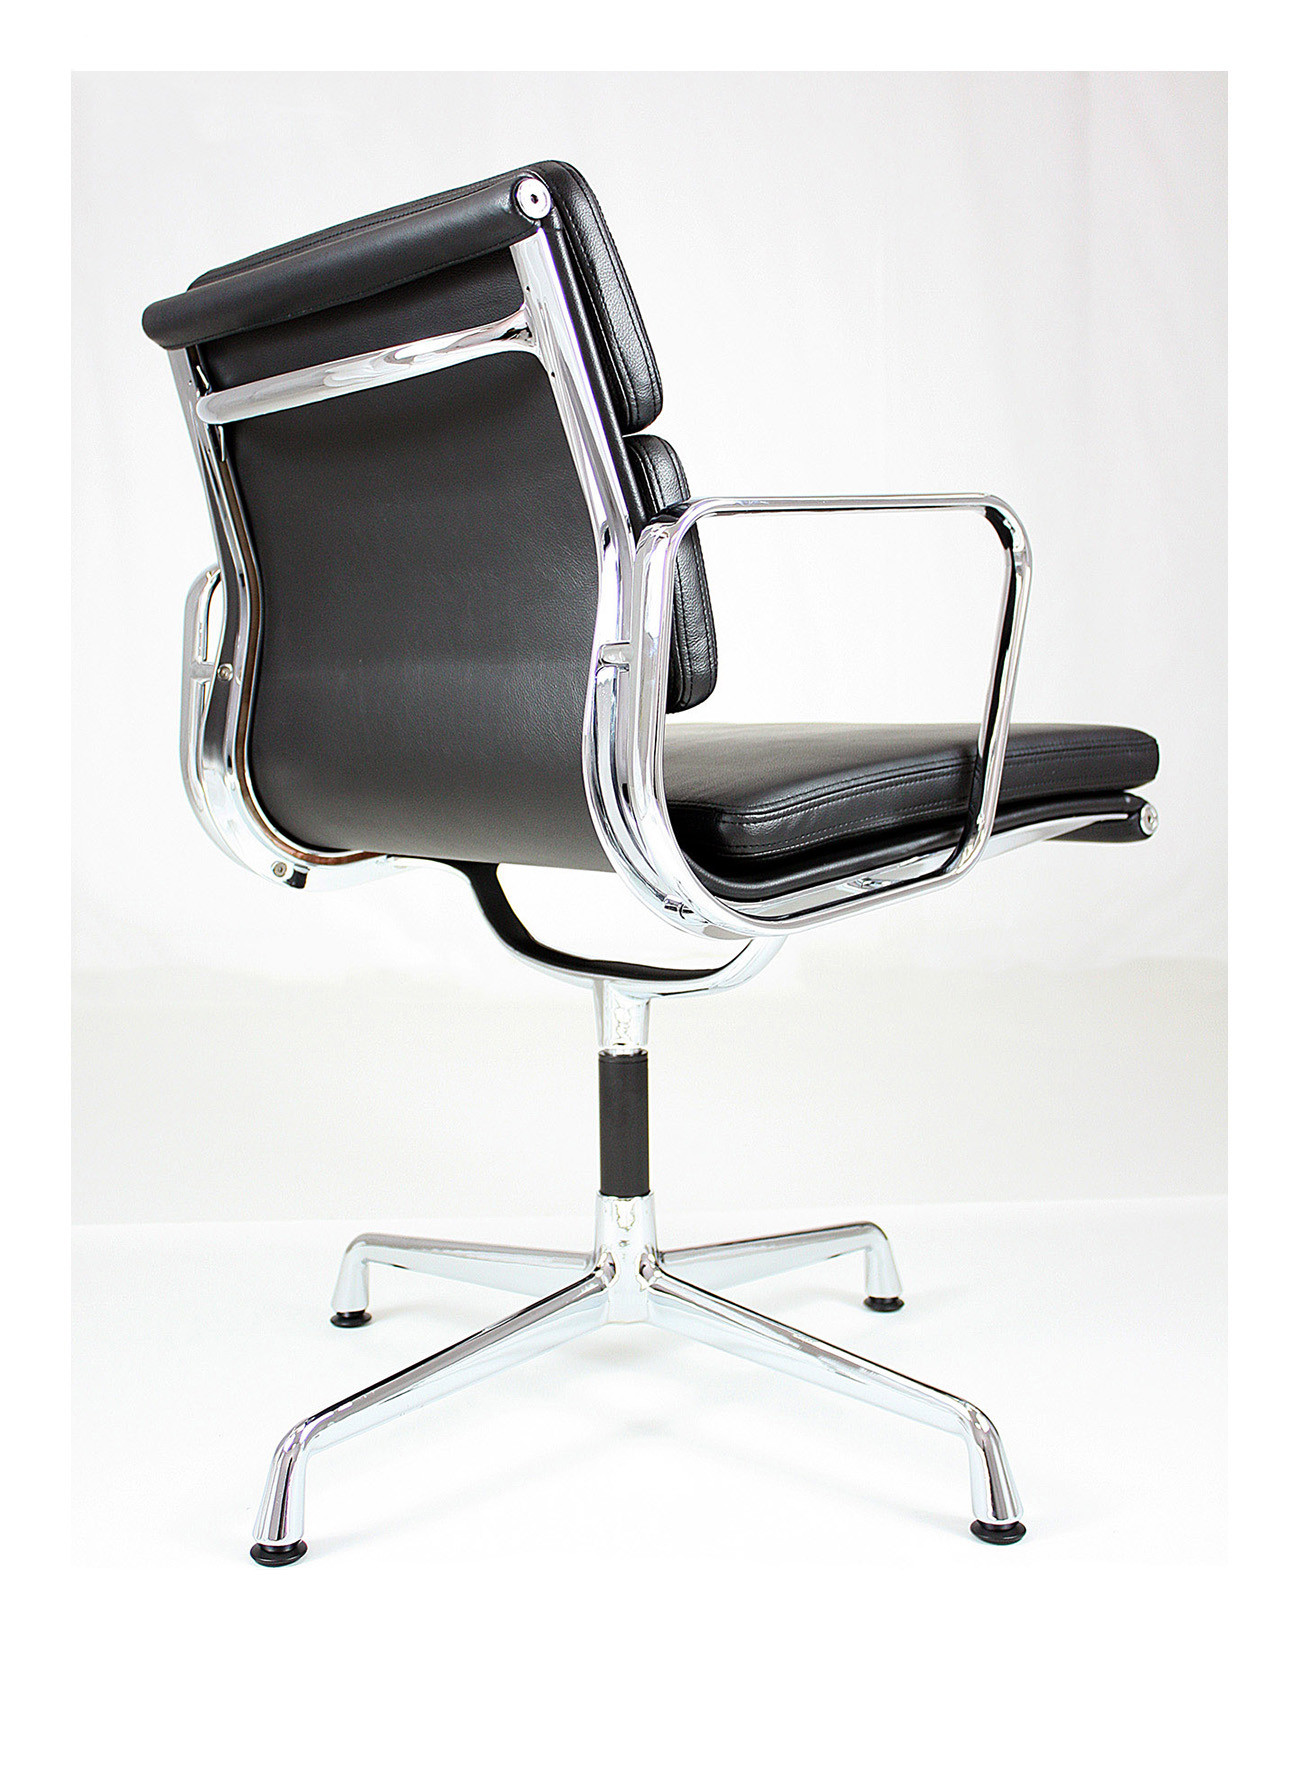 Quality 4 Legs Swivel Office Chair No Wheels Aluminum Frame Black Leather Material wholesale